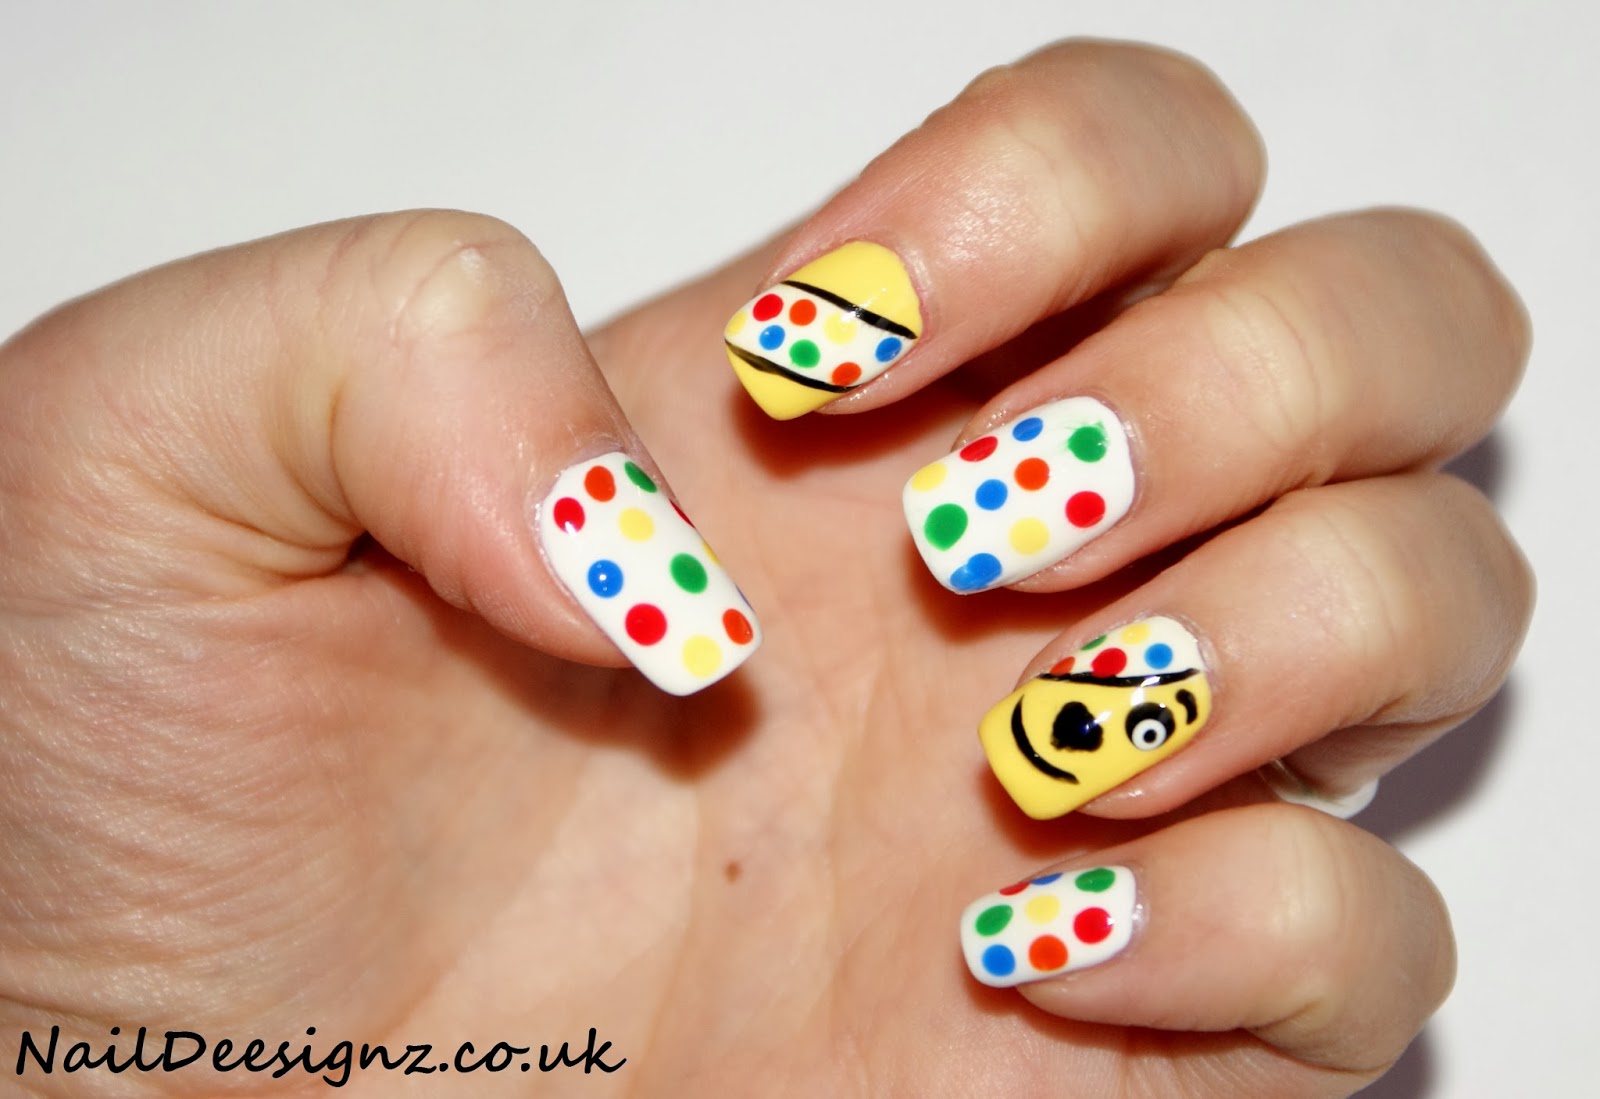 1. Cute and Colorful Nail Designs for Kids - wide 9